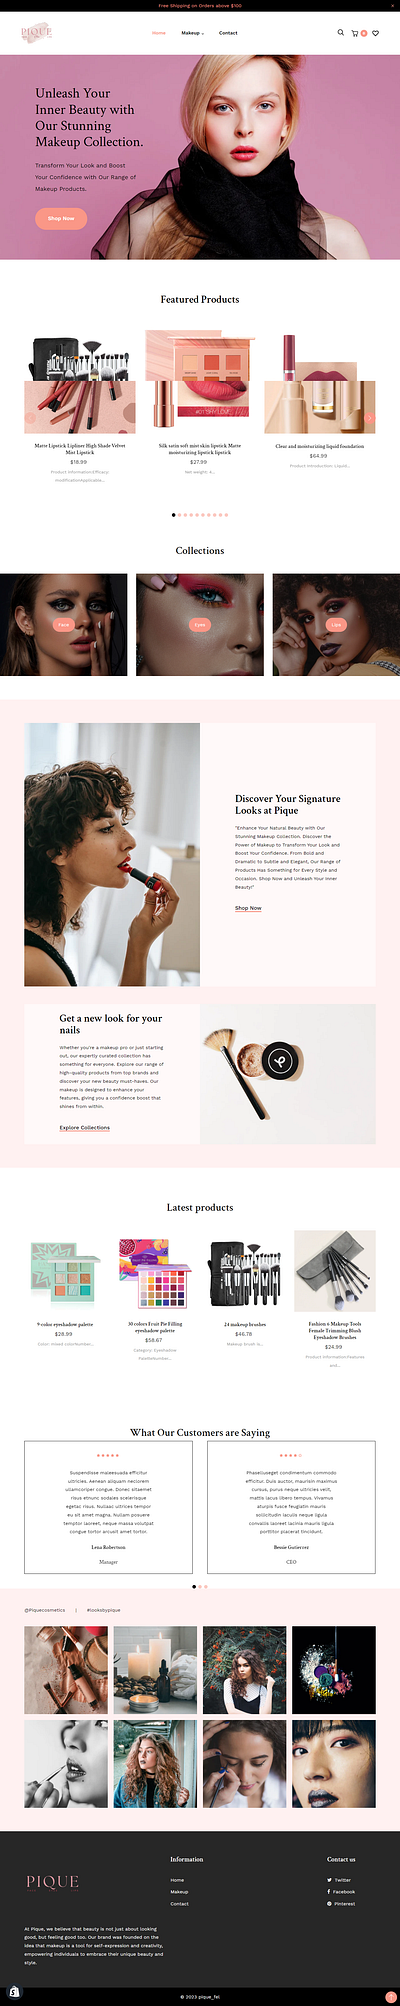 Shopify Beauty Products Store ecommerce homepage landing page shopify shopify store web design webdesign website woocommerce wordpress